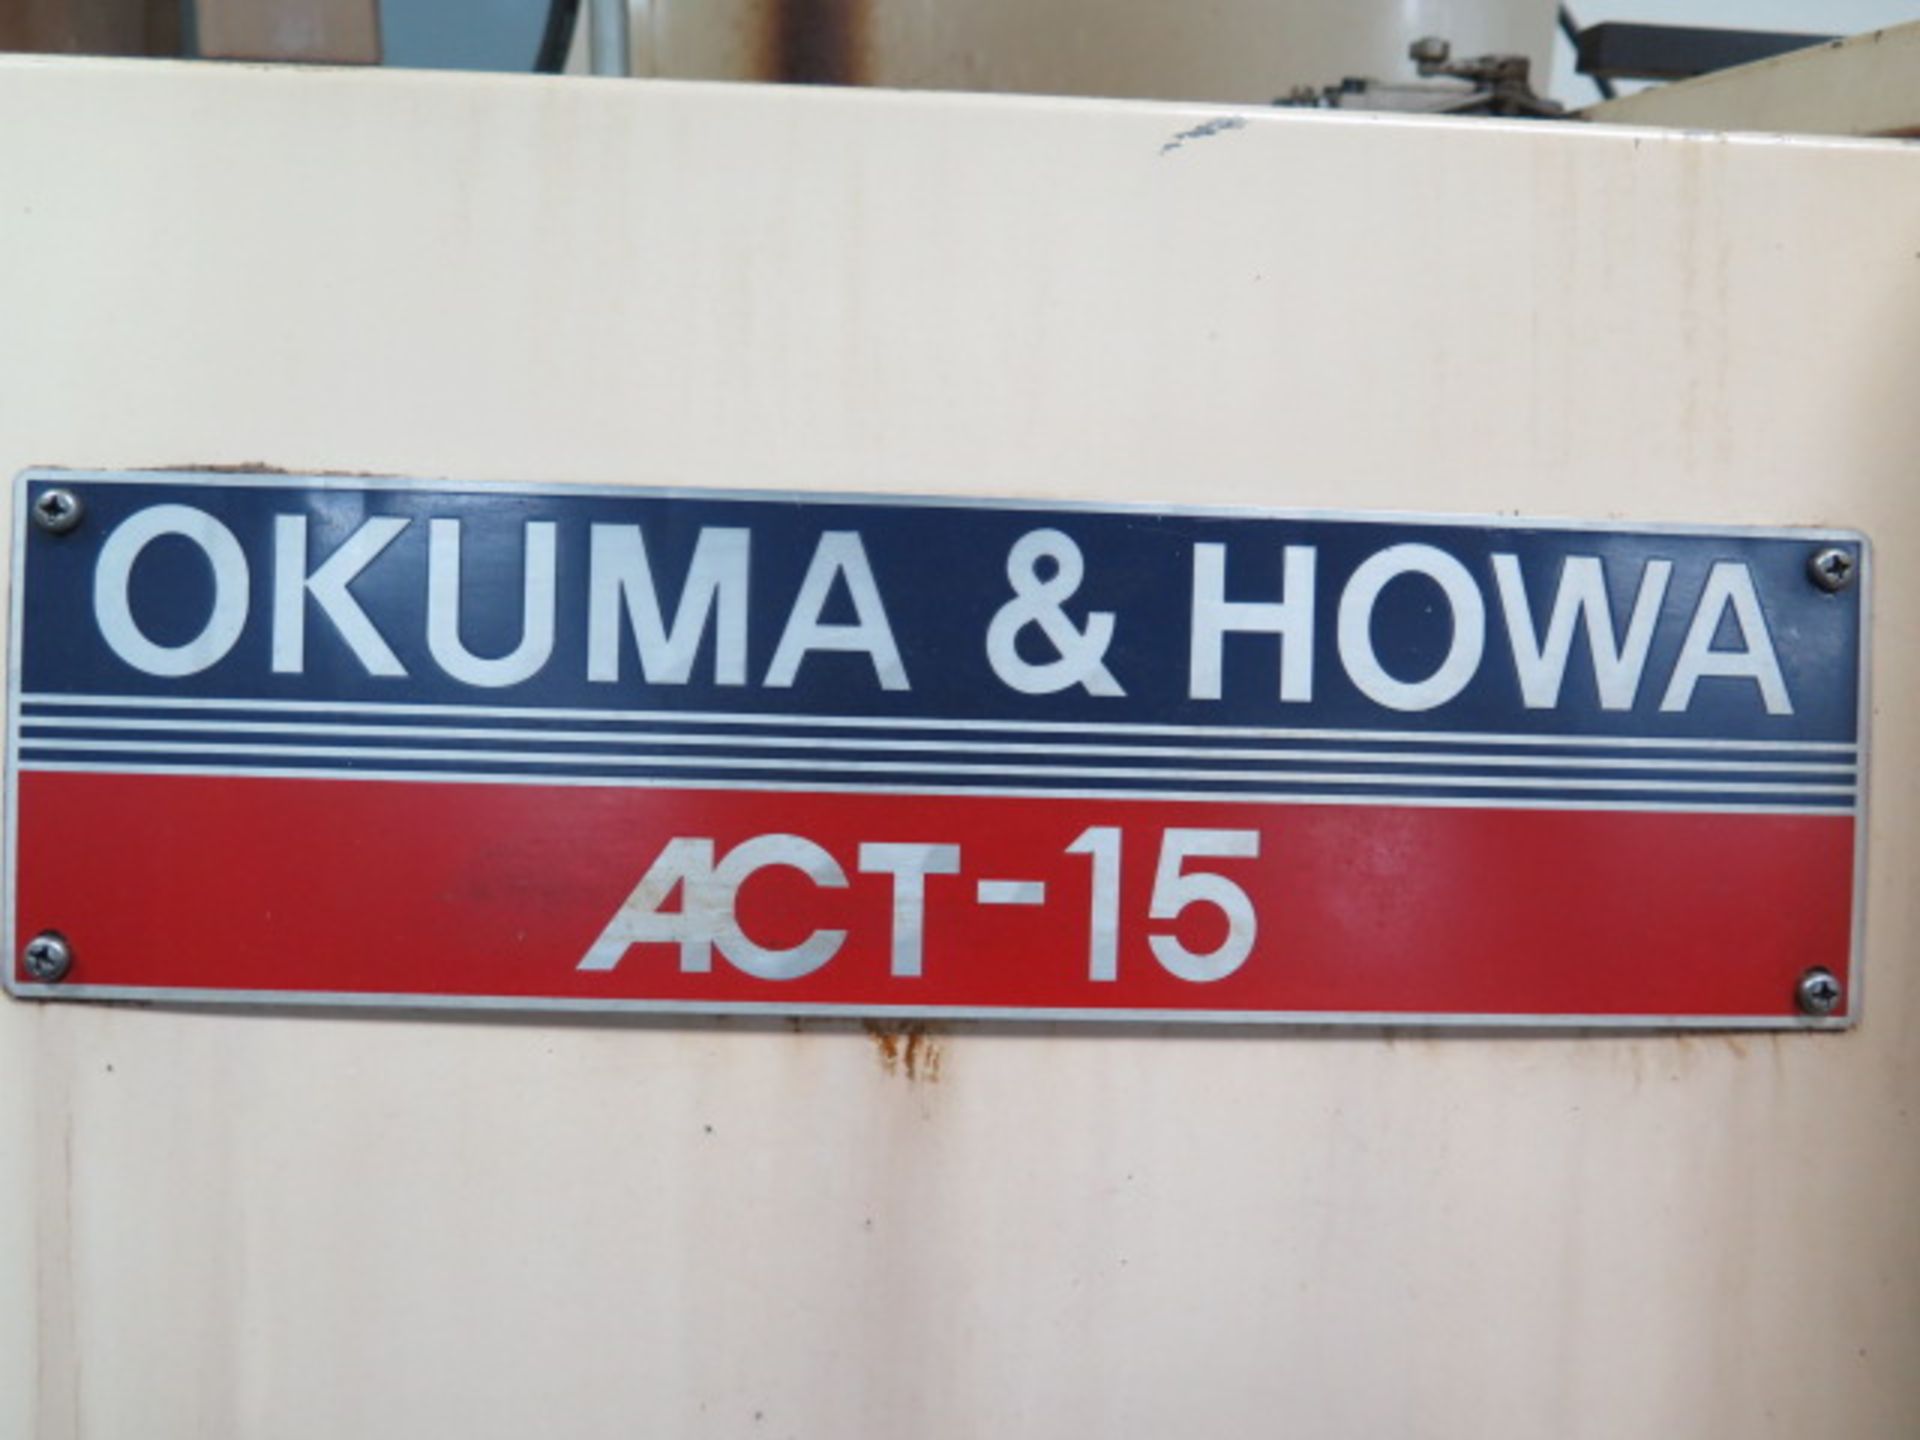 Okuma & Howa ACT-15 CNC Turning Center s/n 00082 w/ Fanuc 18-T Controls,8-Station Turret, SOLD AS IS - Image 10 of 11